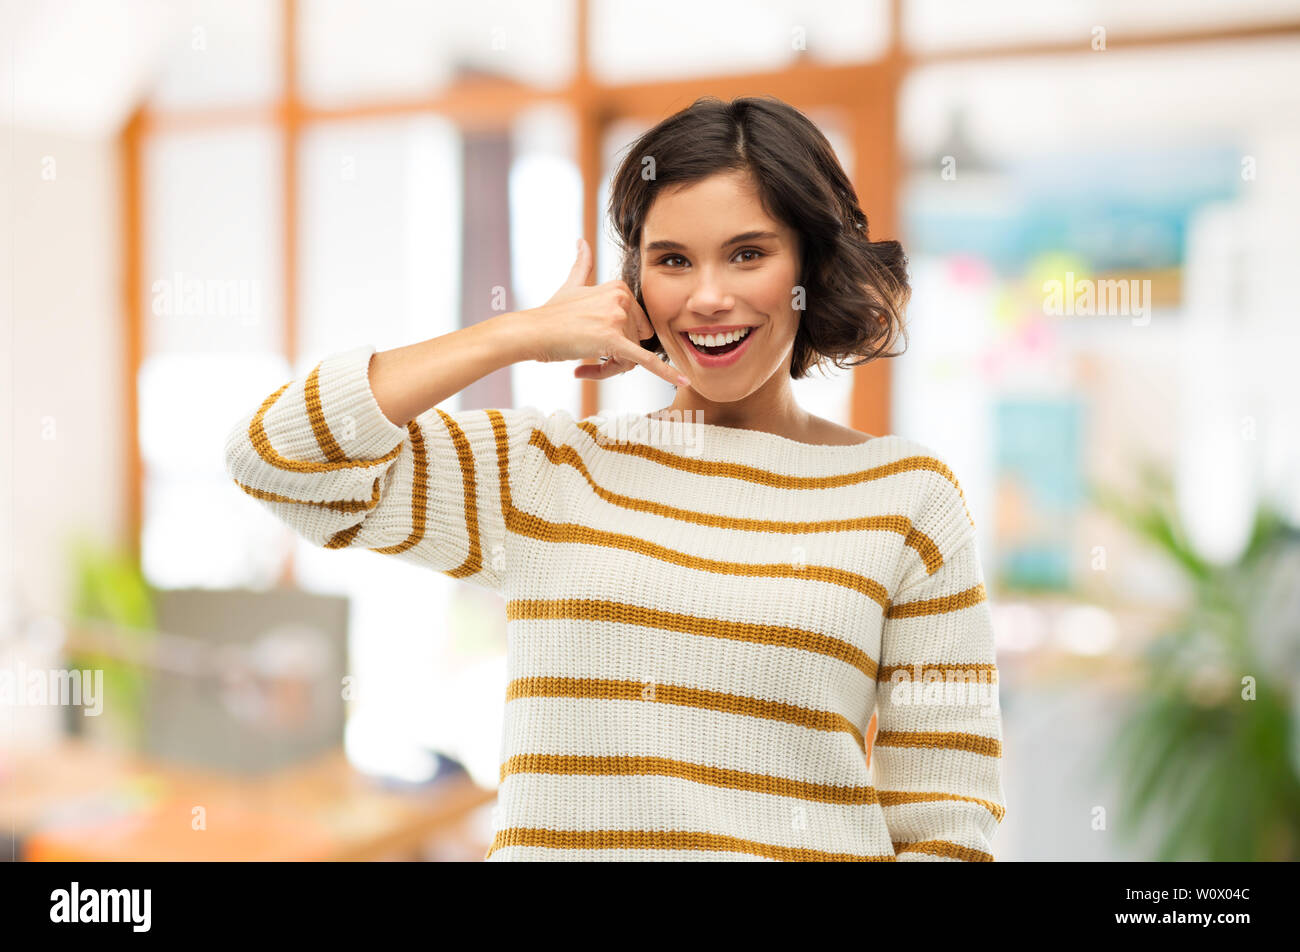 happy smiling woman showing phone call gesture Stock Photo